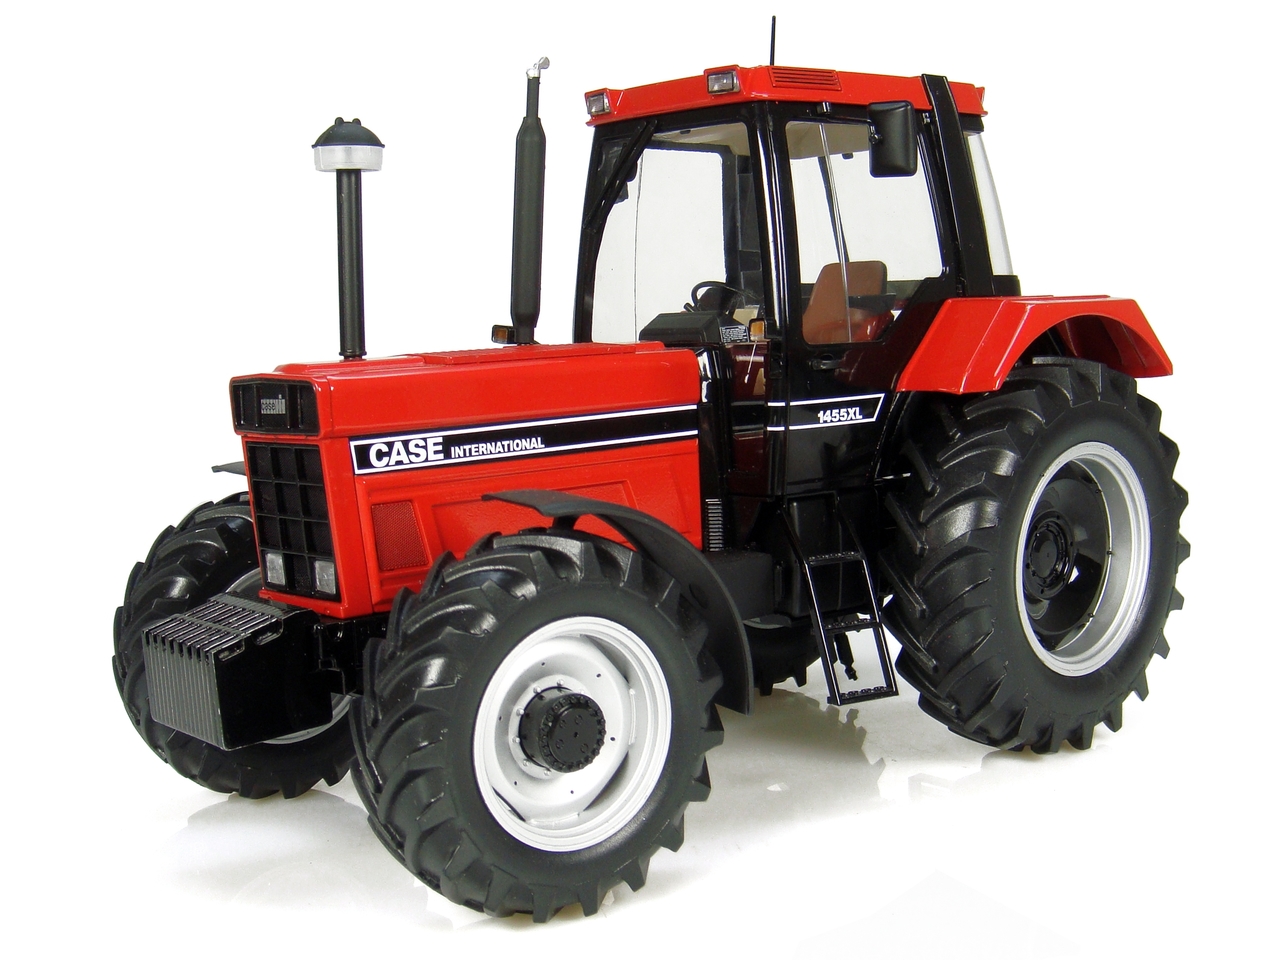 1986 Case Ih 1455xl Tractor (2nd Generation) Limited Edition To 2000 Pieces Worldwide 1/16 Diecast Model By Universal Hobbies